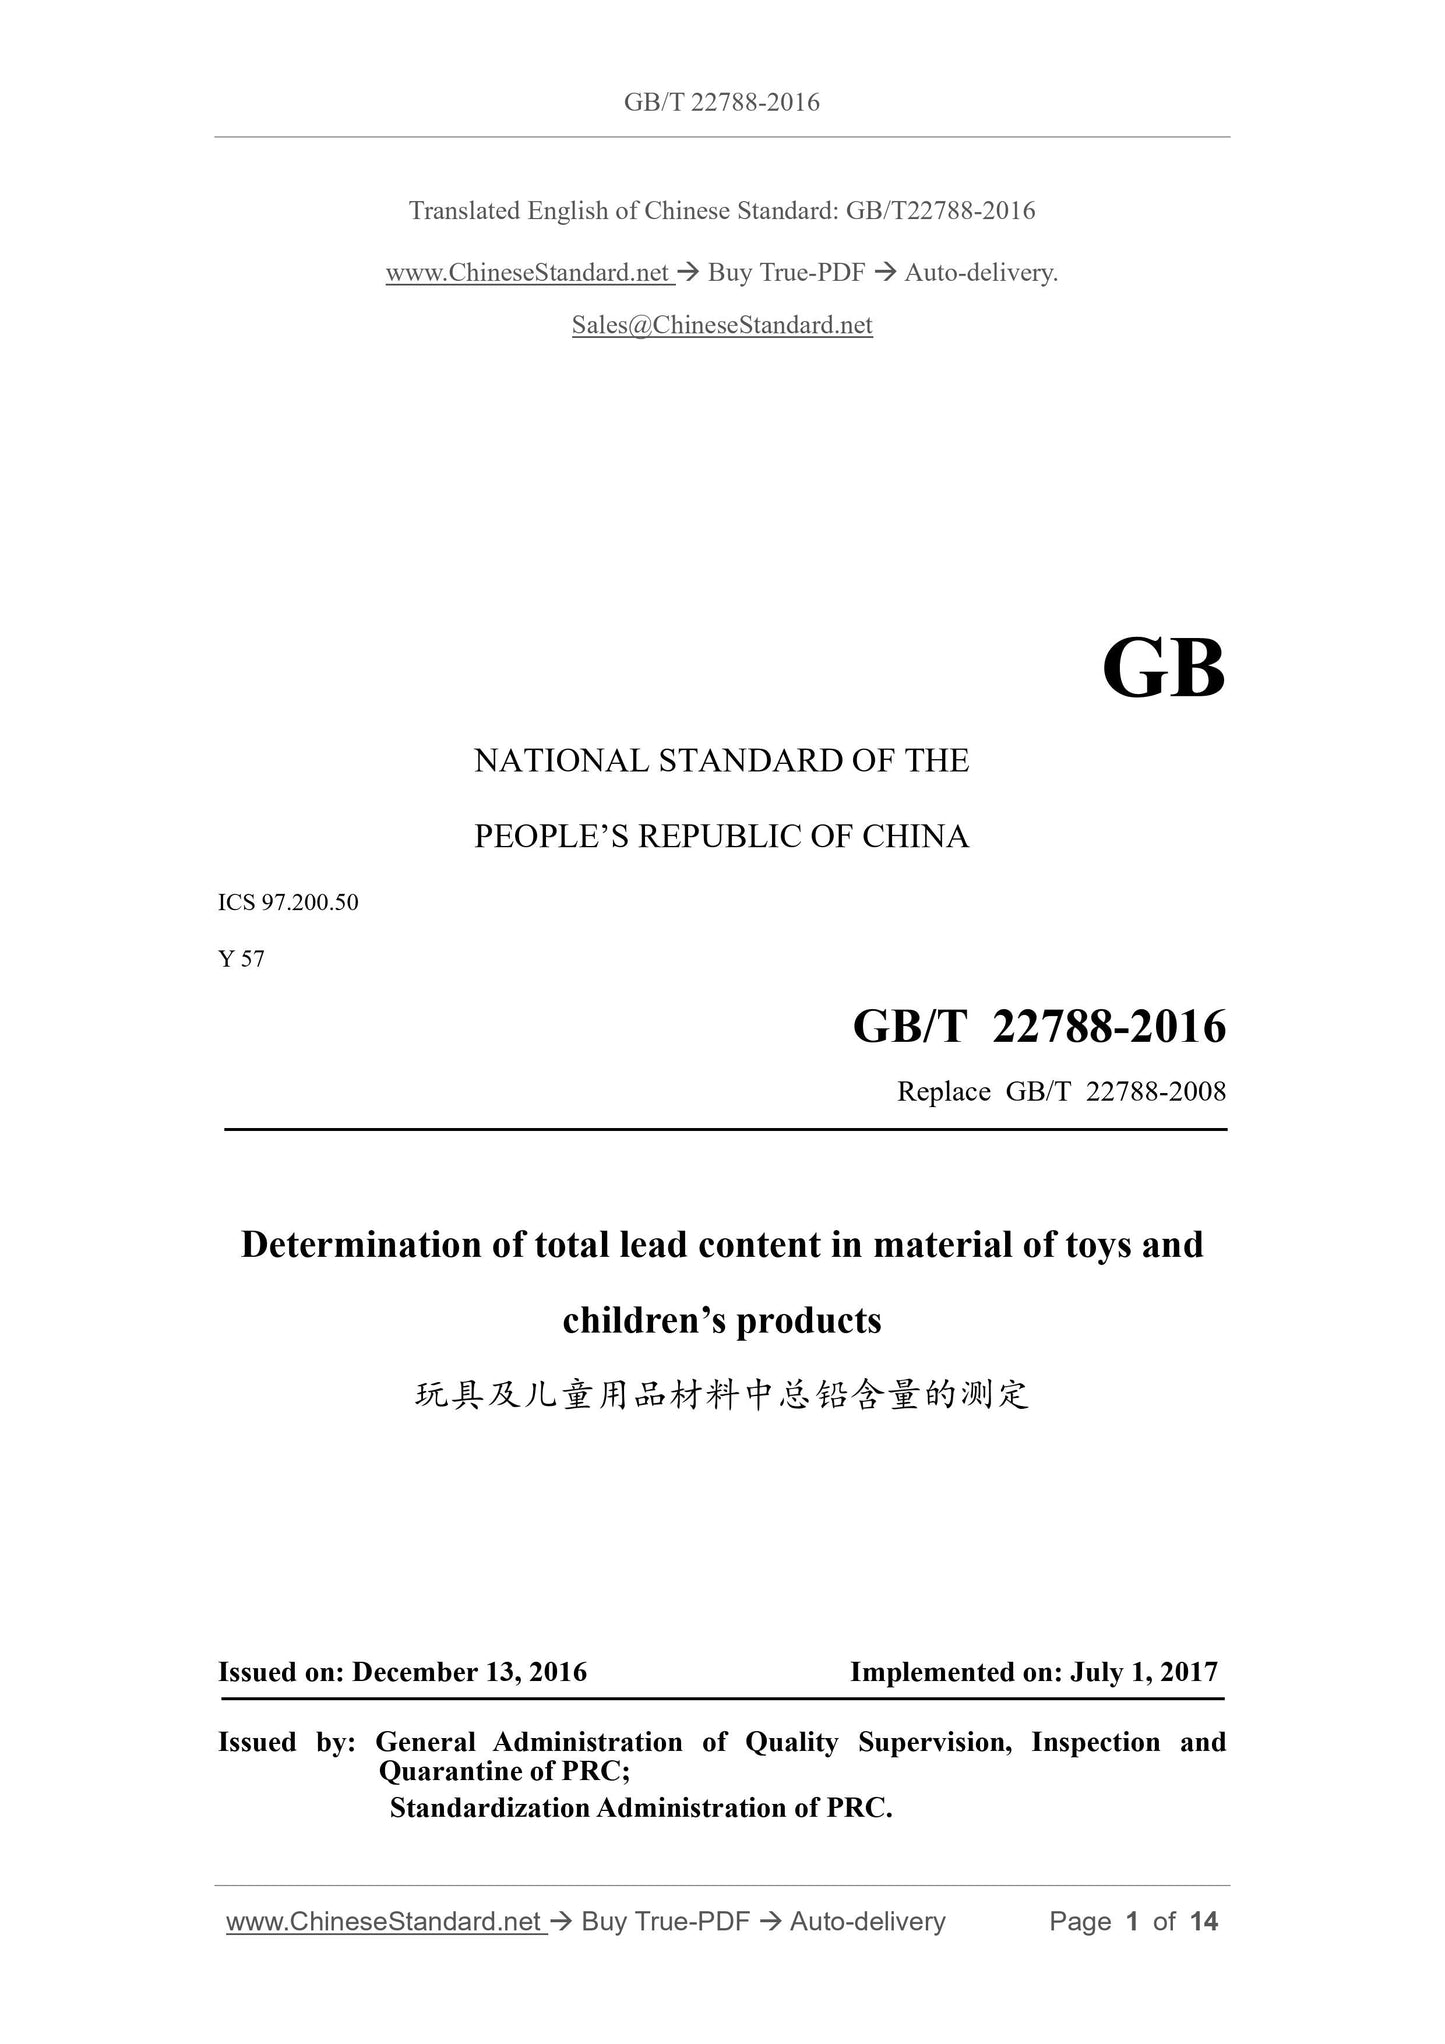 GB/T 22788-2016 Page 1